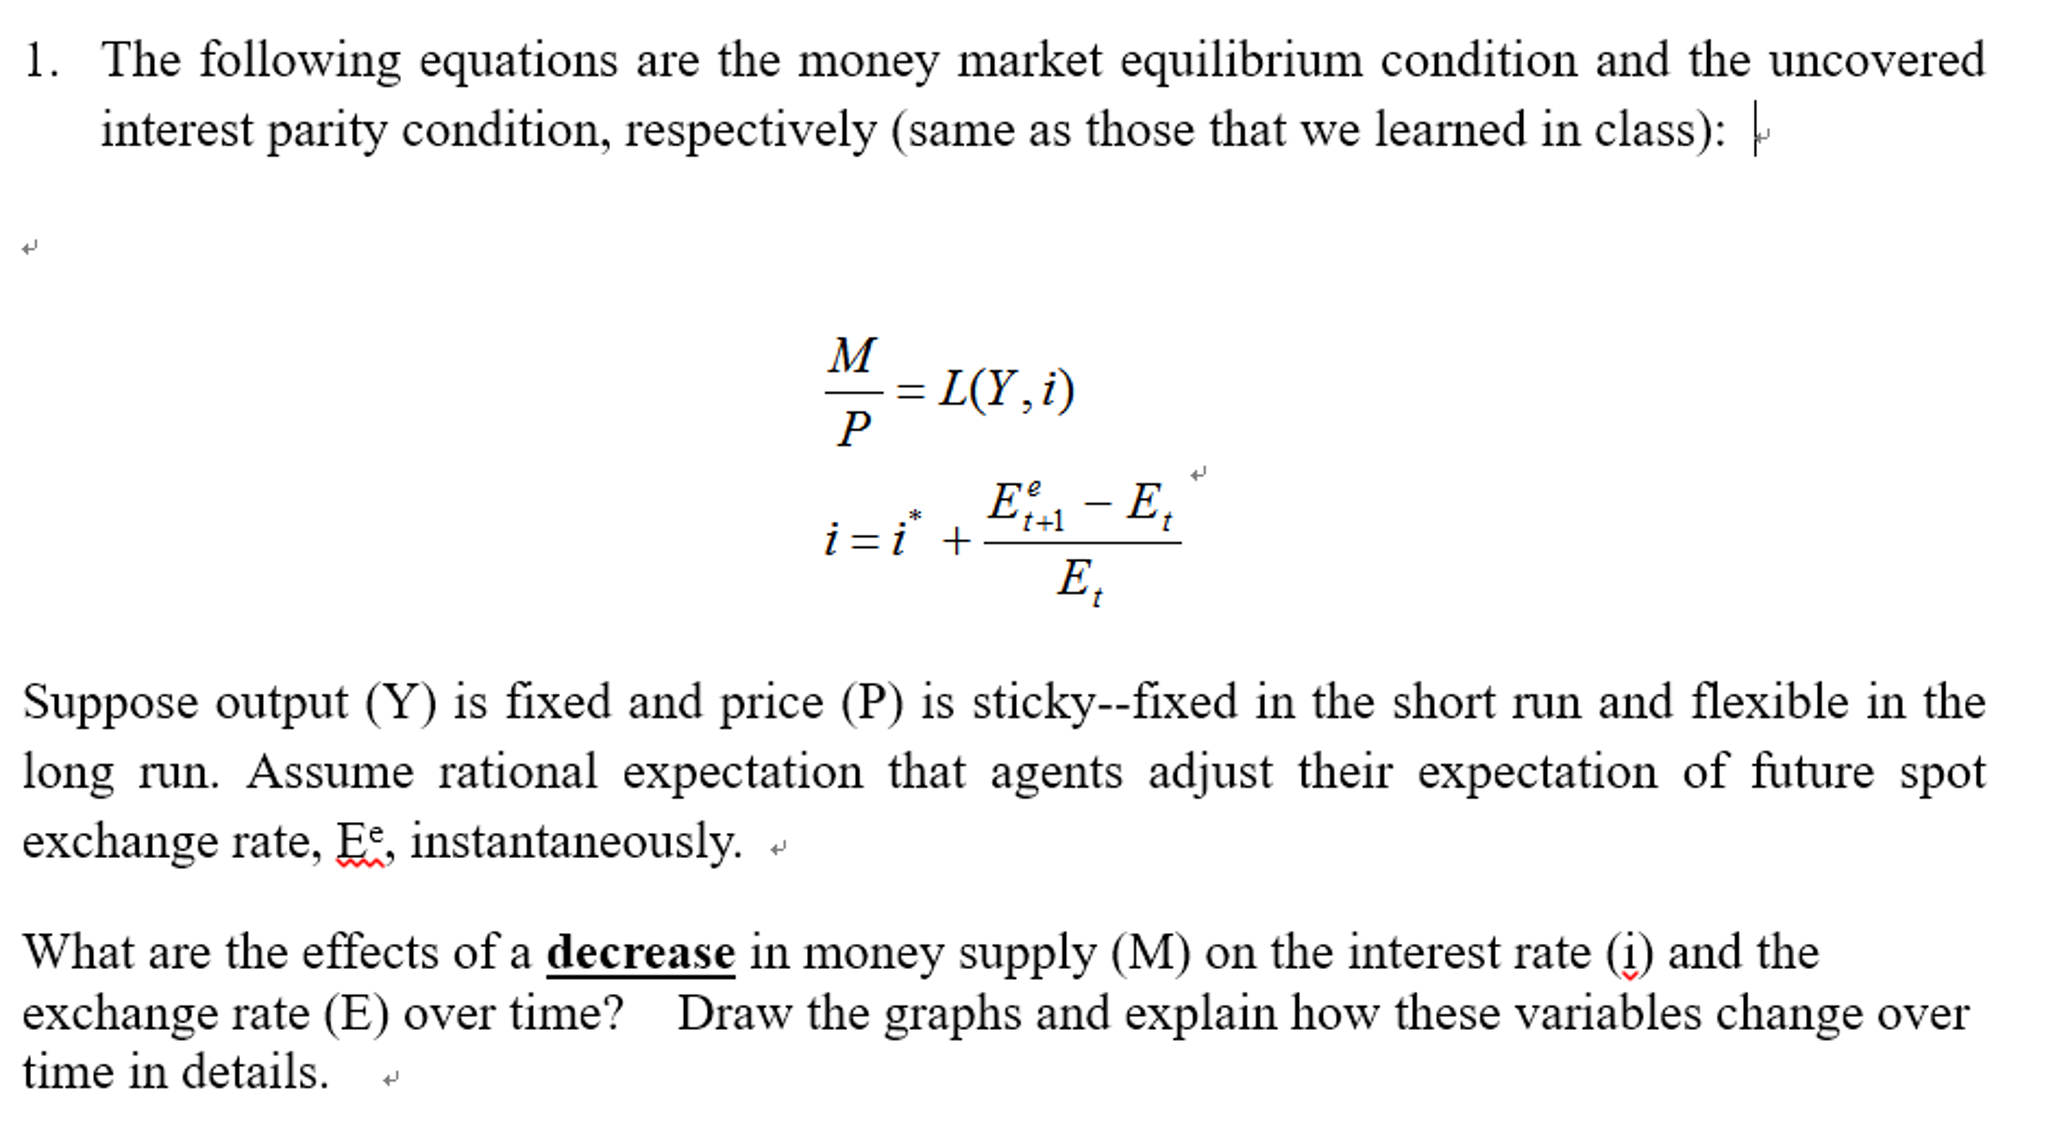 market clearing price equation